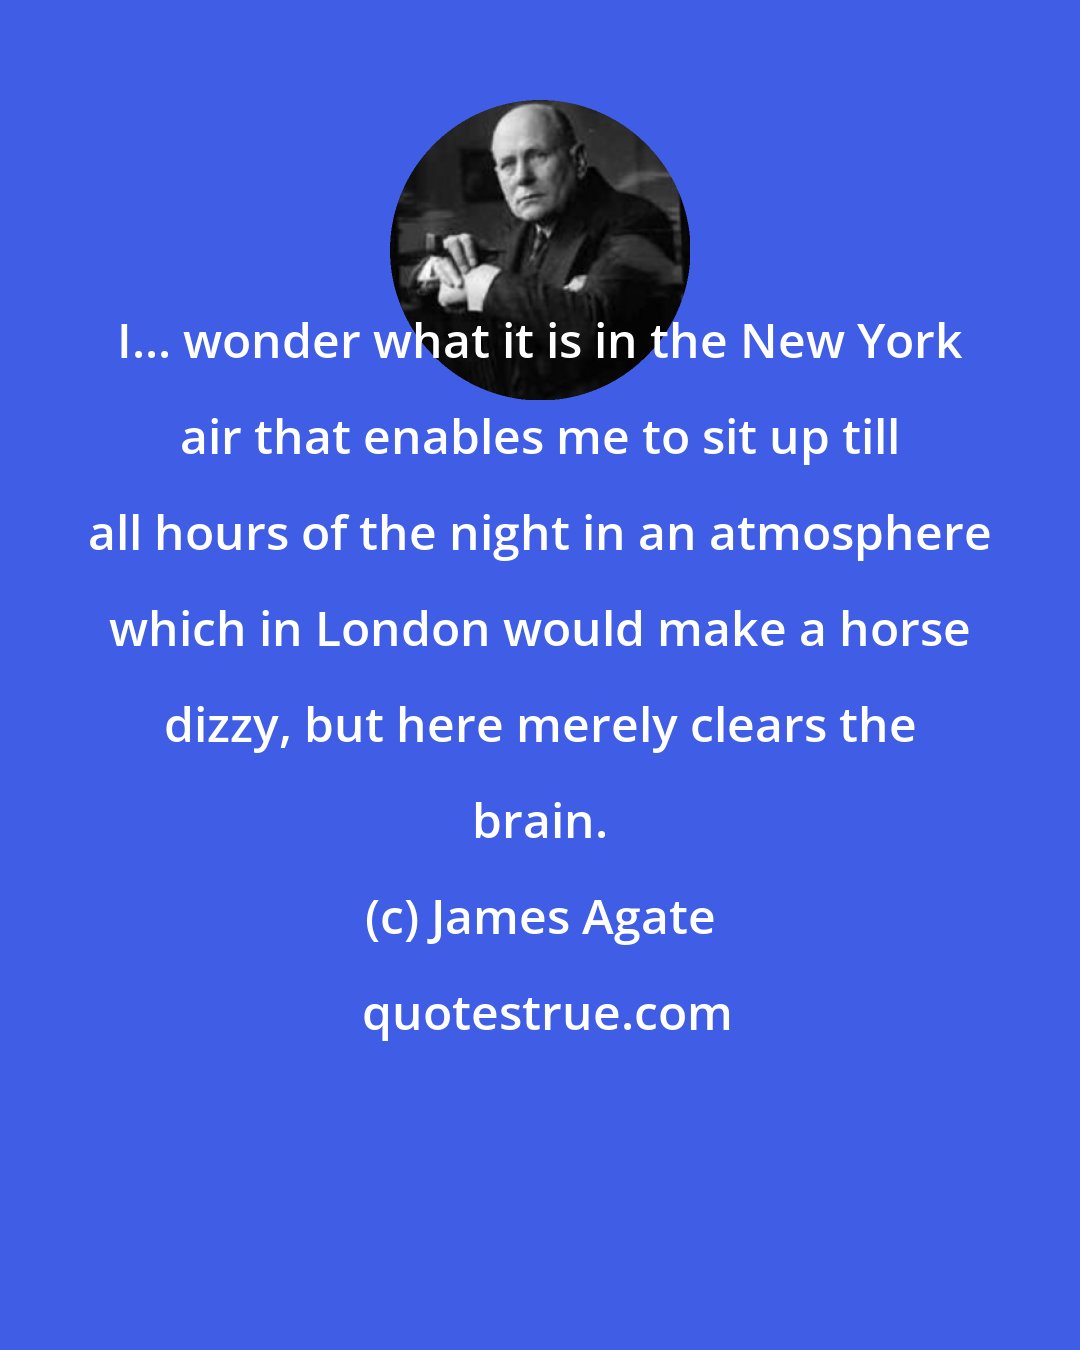 James Agate: I... wonder what it is in the New York air that enables me to sit up till all hours of the night in an atmosphere which in London would make a horse dizzy, but here merely clears the brain.